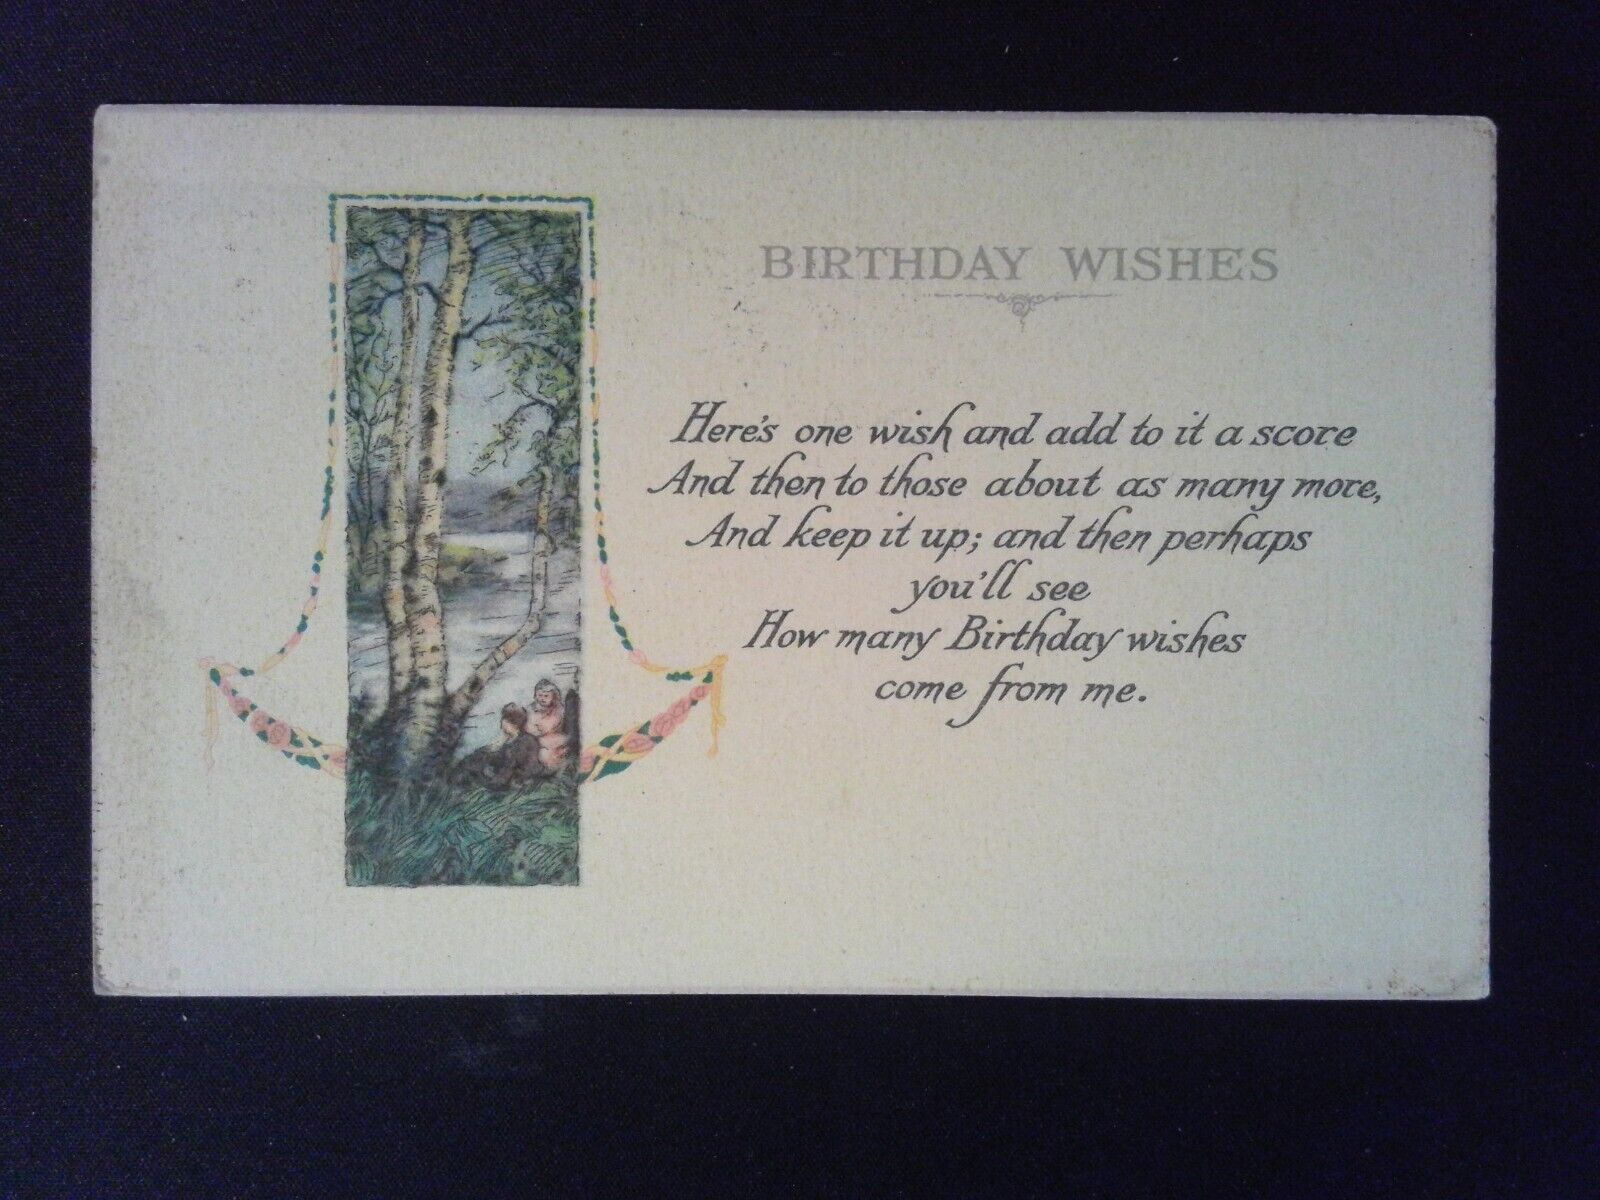 1922 Stamped Birthday Wishes Postcard Birthday Series No 264 Made in USA